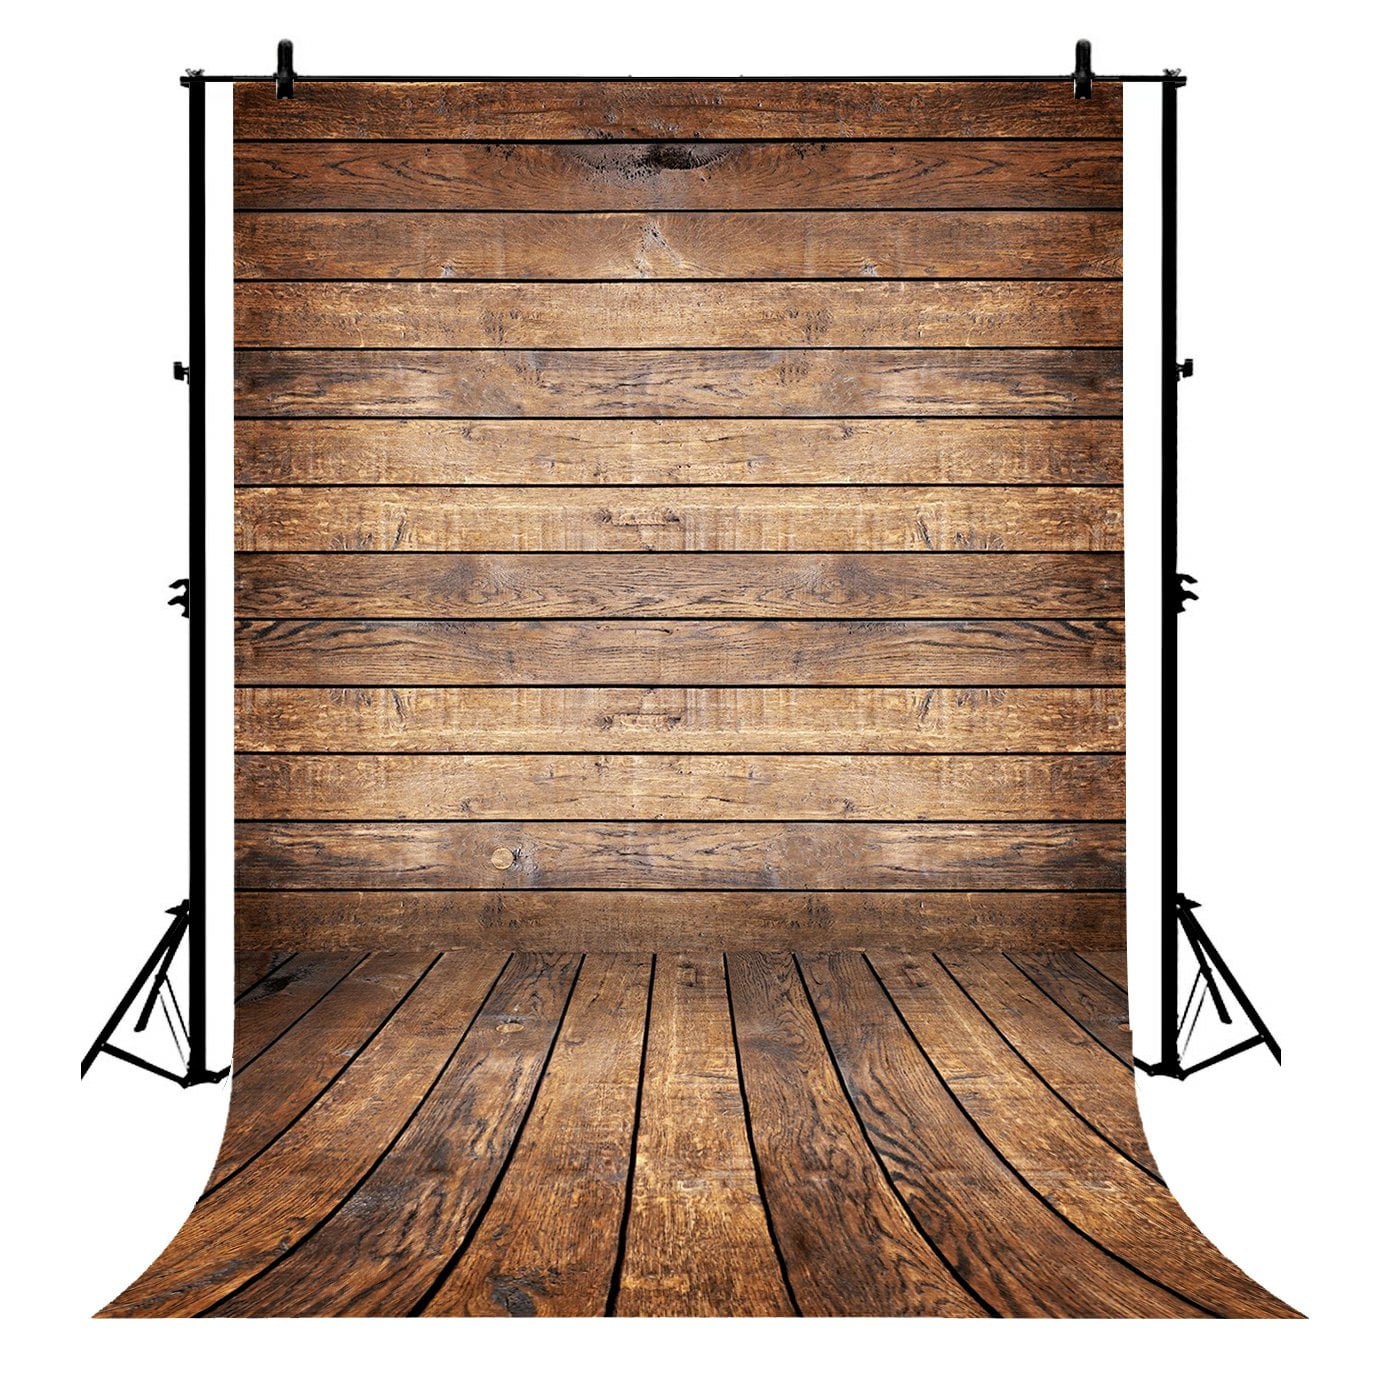 VARWANEO 3D Background Cloth Imitation Wood Grain Photography Shooting Background Cloth Props Board Gift